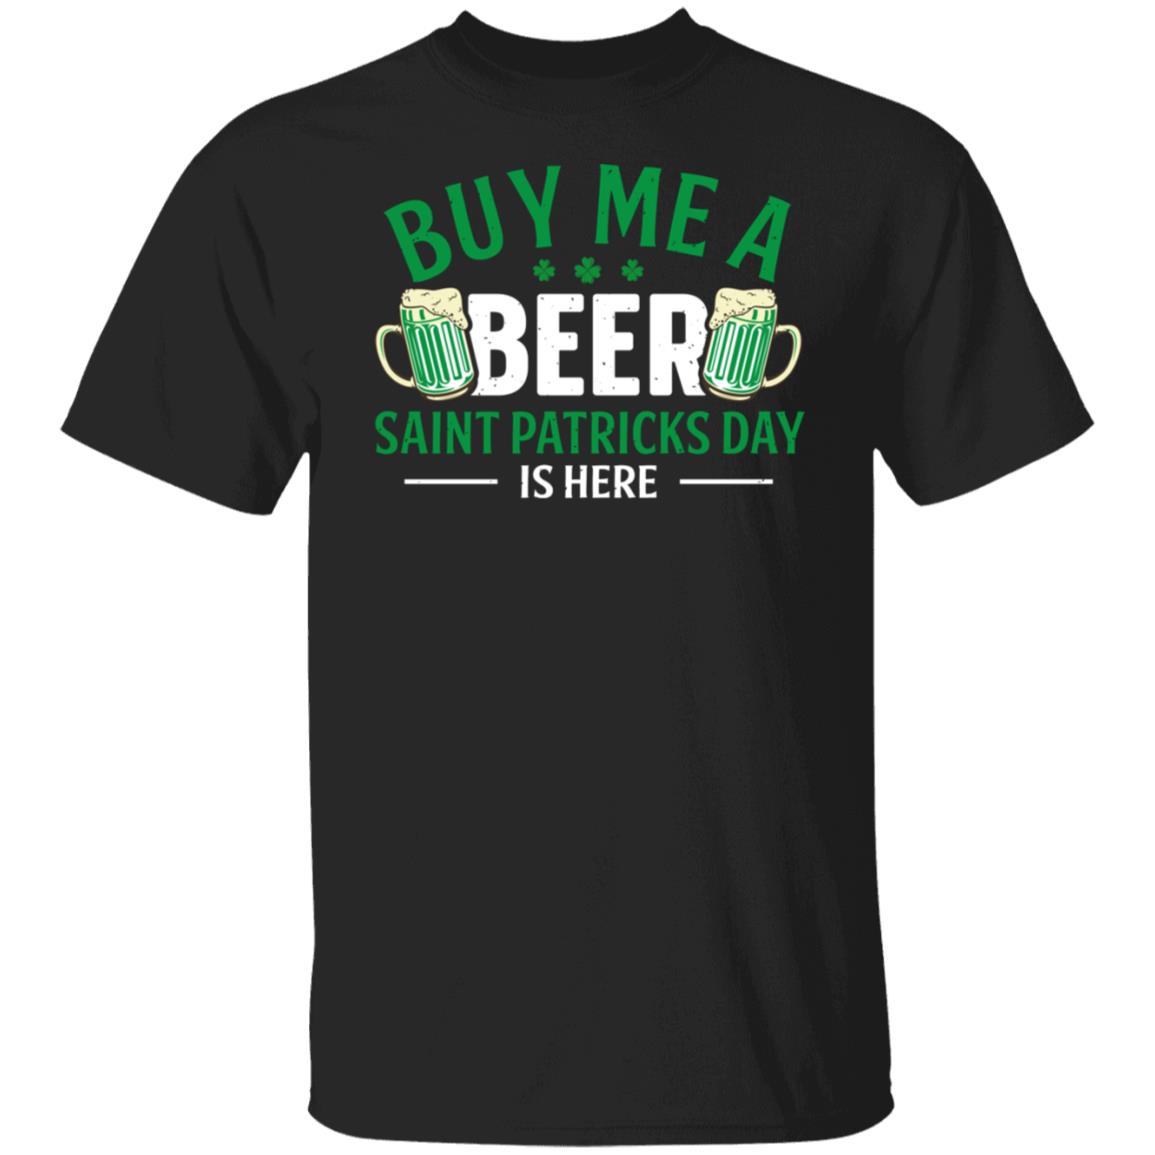 Buy Me a Beer Saint Patricks Day is Here Shirt